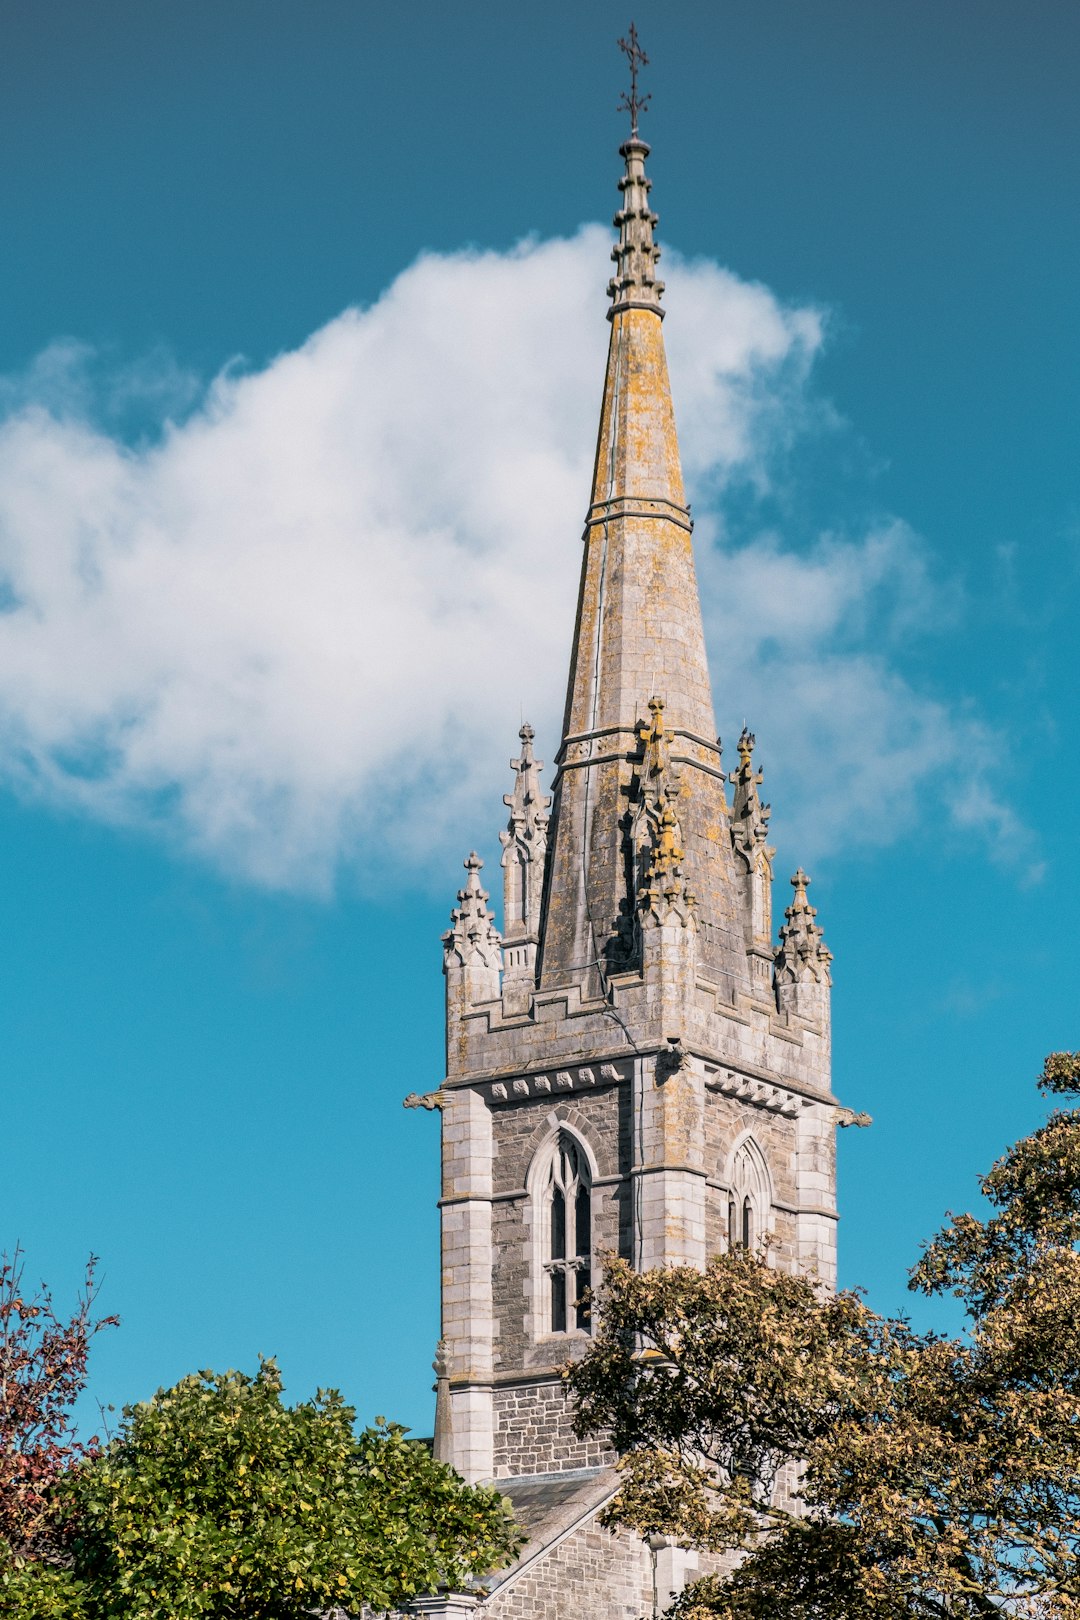 Travel Tips and Stories of Malahide in Ireland